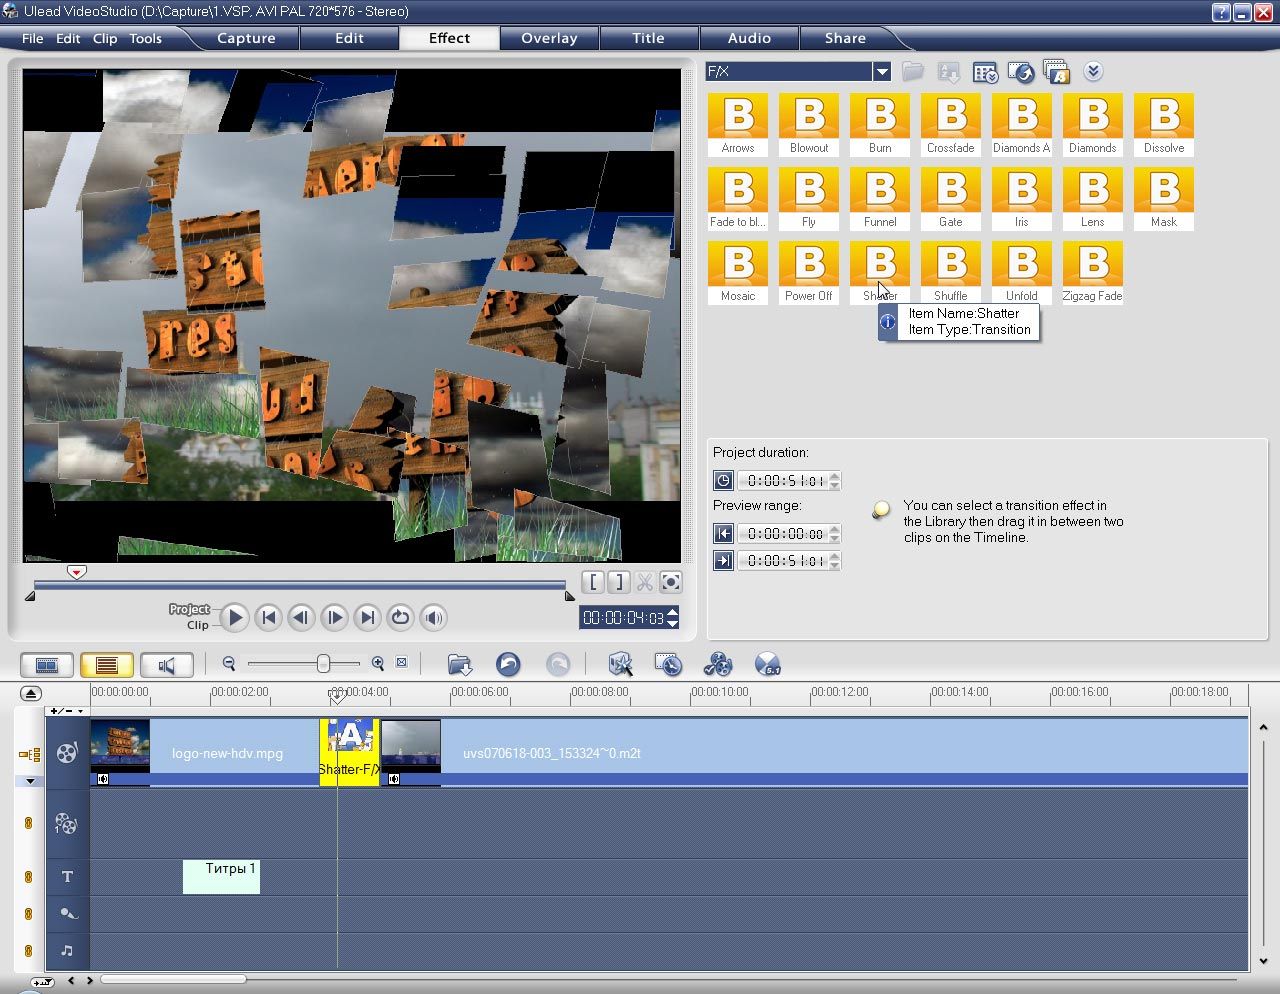 ulead video studio 11 free download with serial key